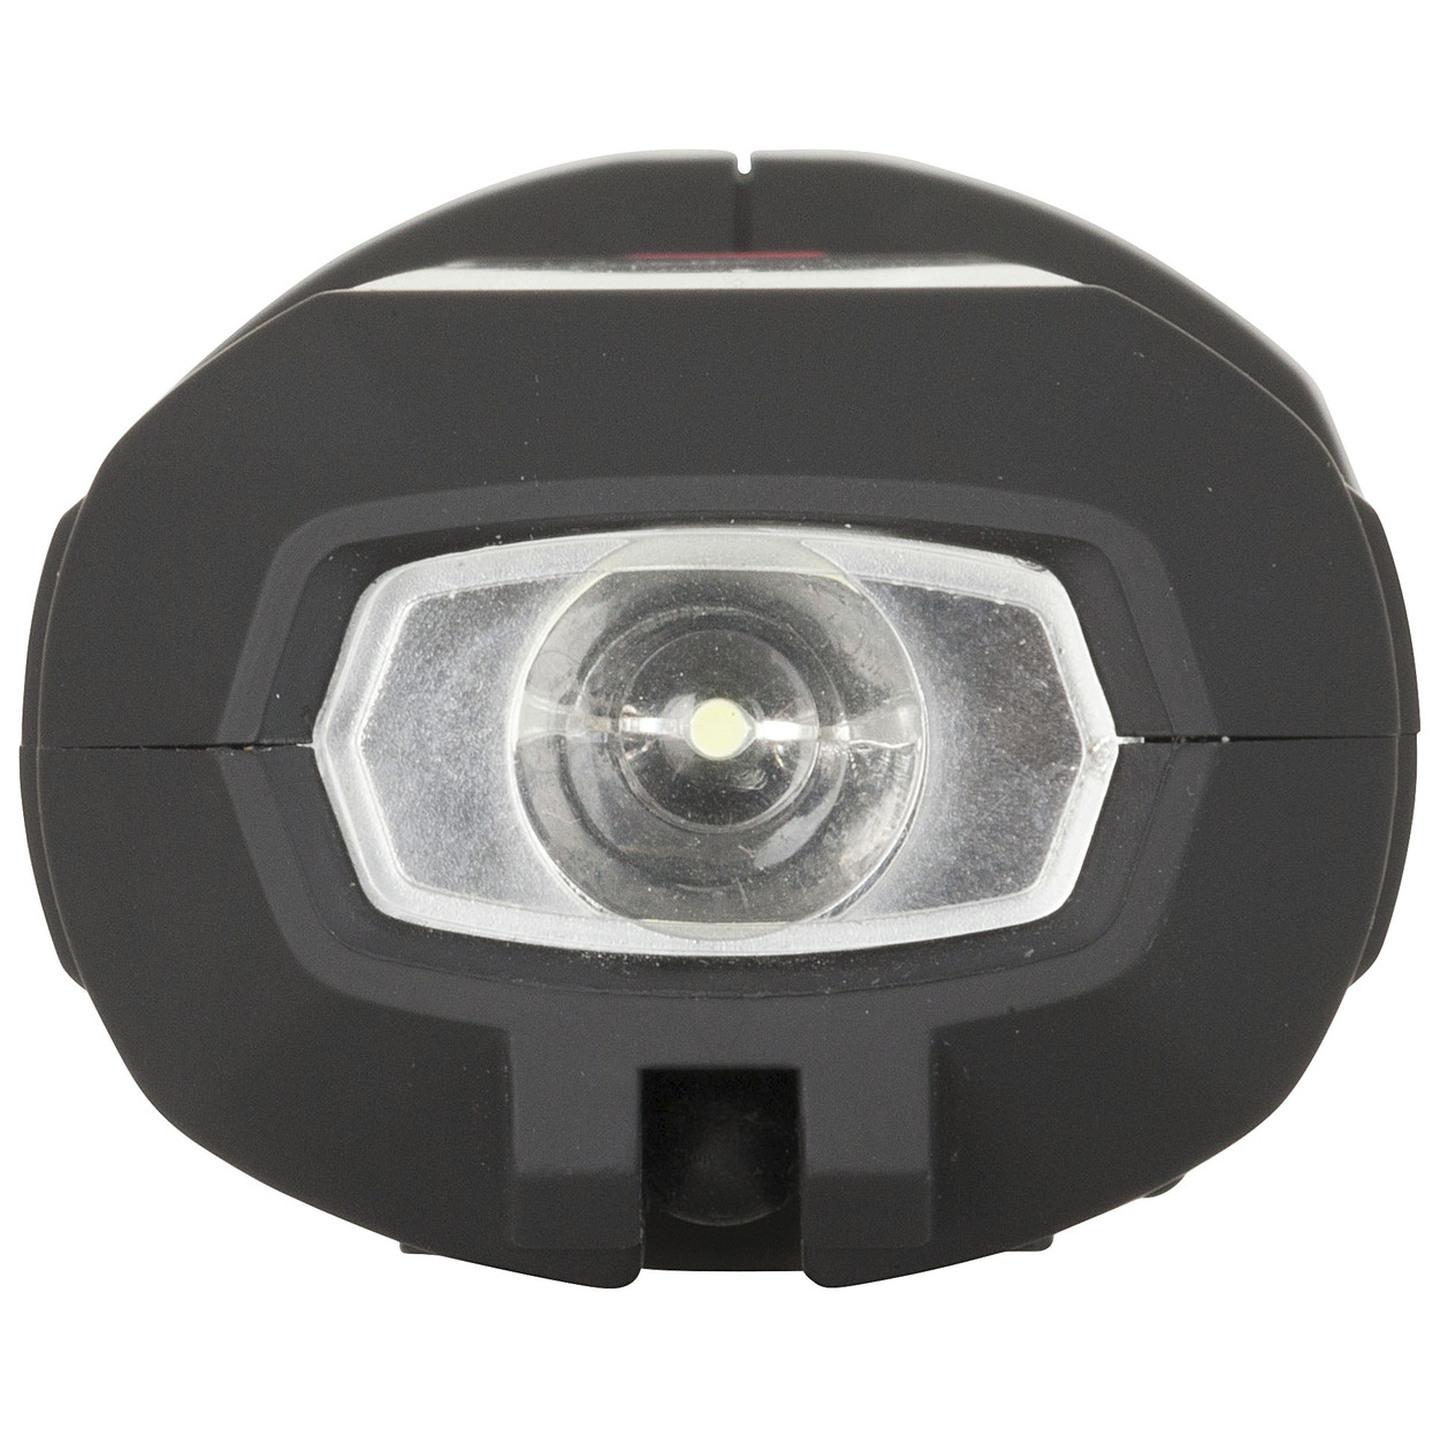  250 Lumen Hand Held Rechargeable Auto Worklight with COB LED 